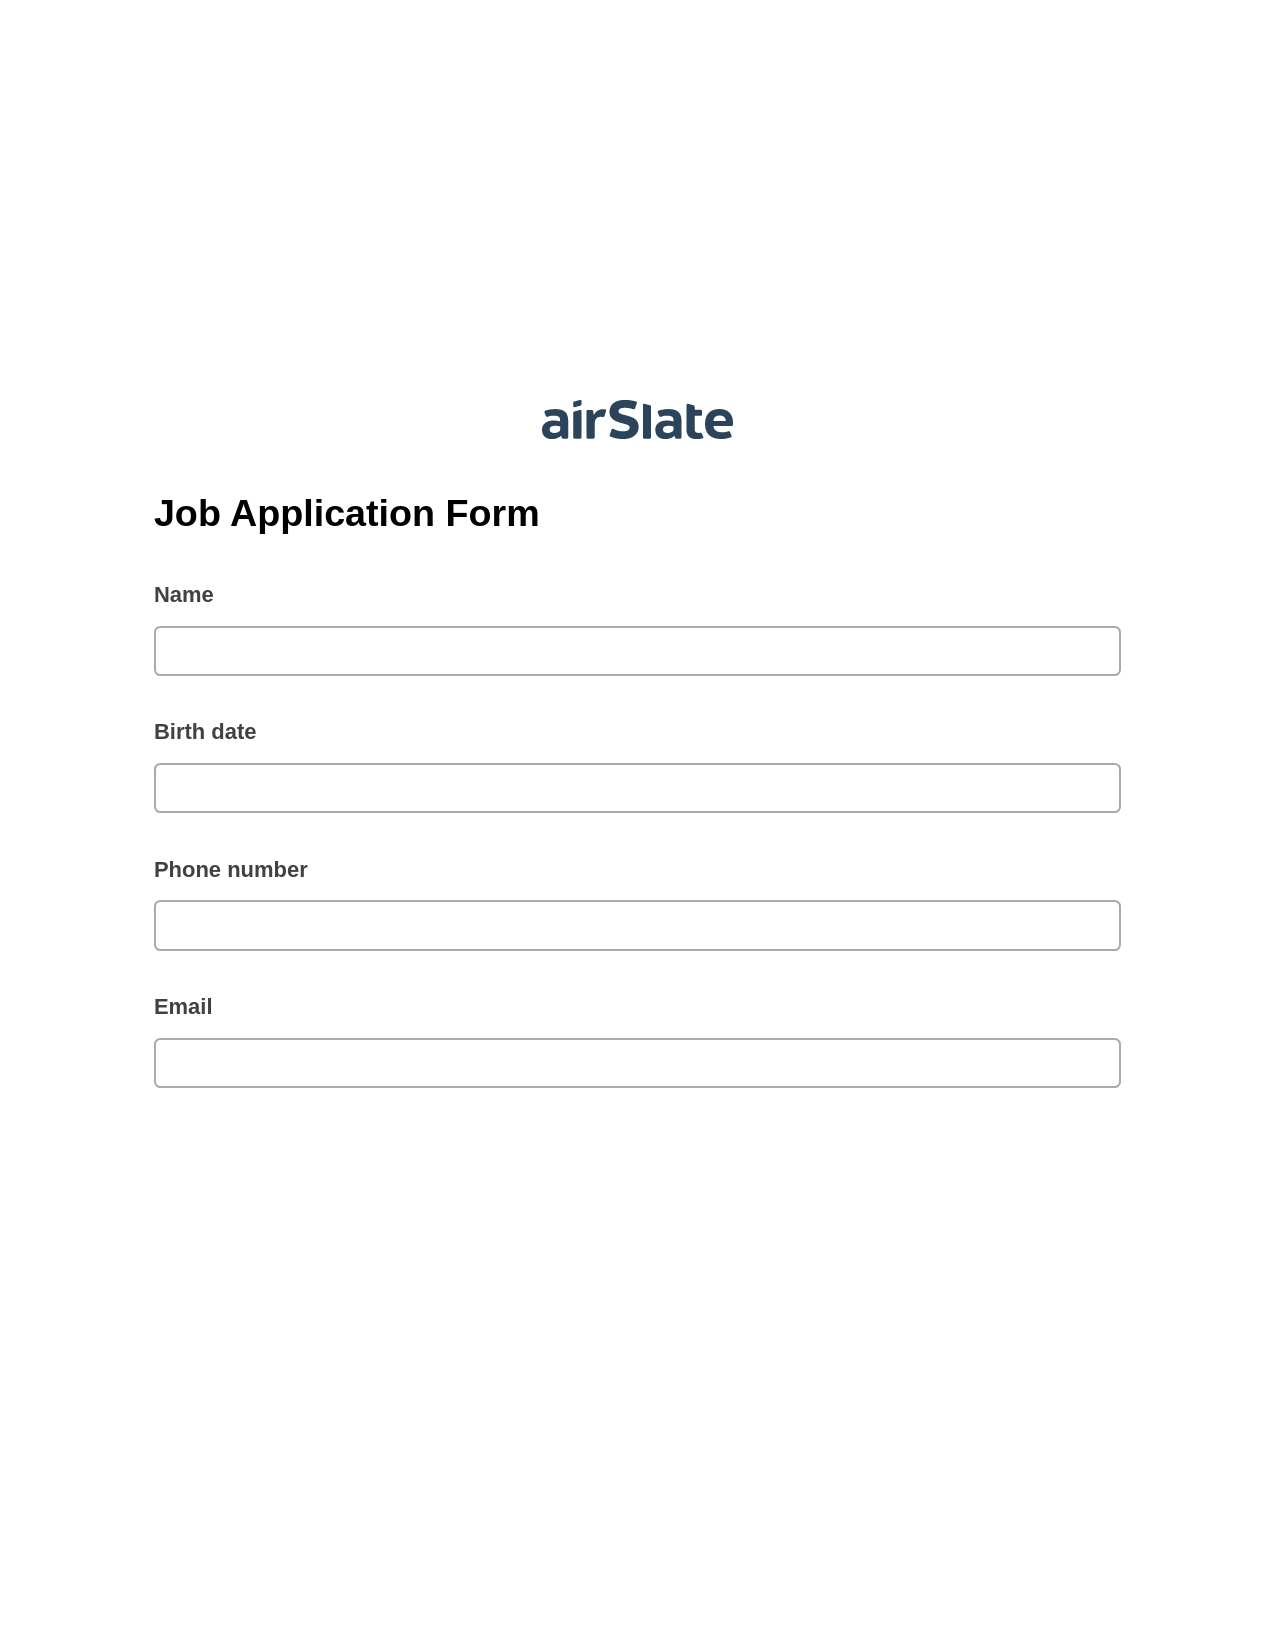 Job Application Form Pre-fill Slate from MS Dynamics 365 Records Bot, Pre-fill with Custom Data Bot, Export to Smartsheet